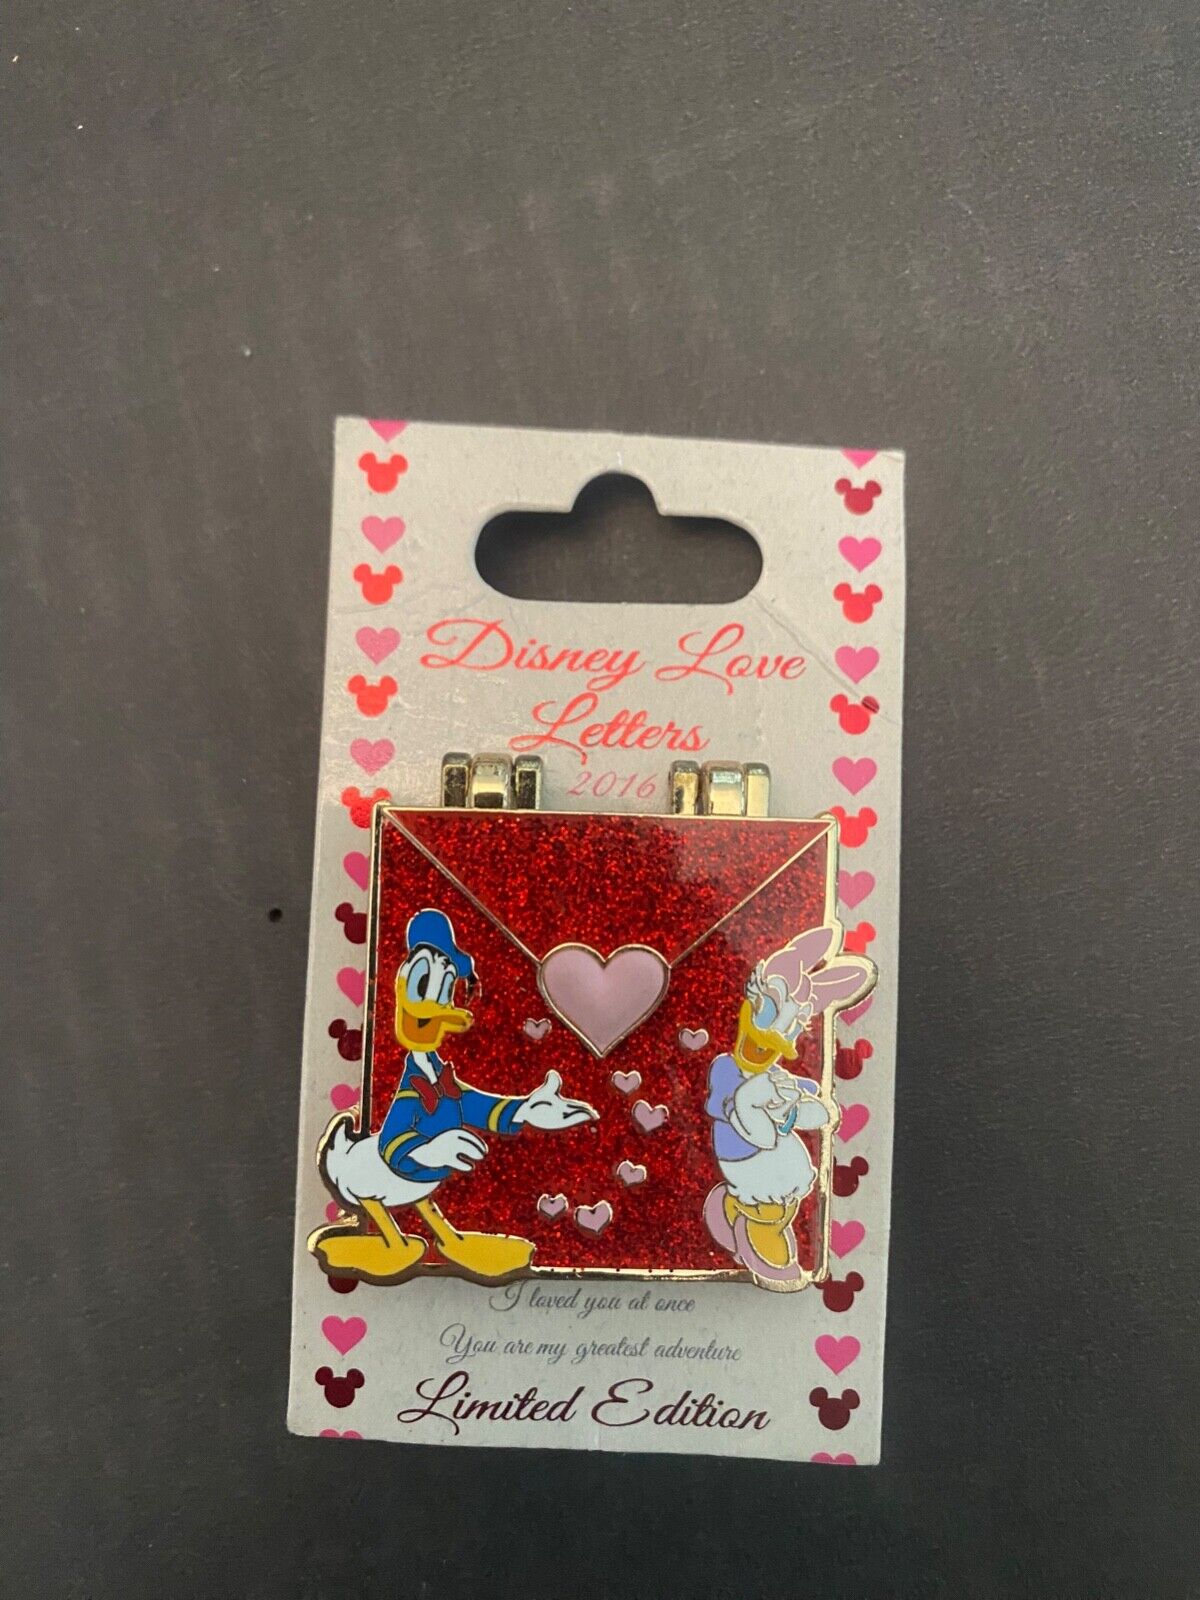 Donald and Daisy Duck 2016 Disney Love Letter Pin LE 3000